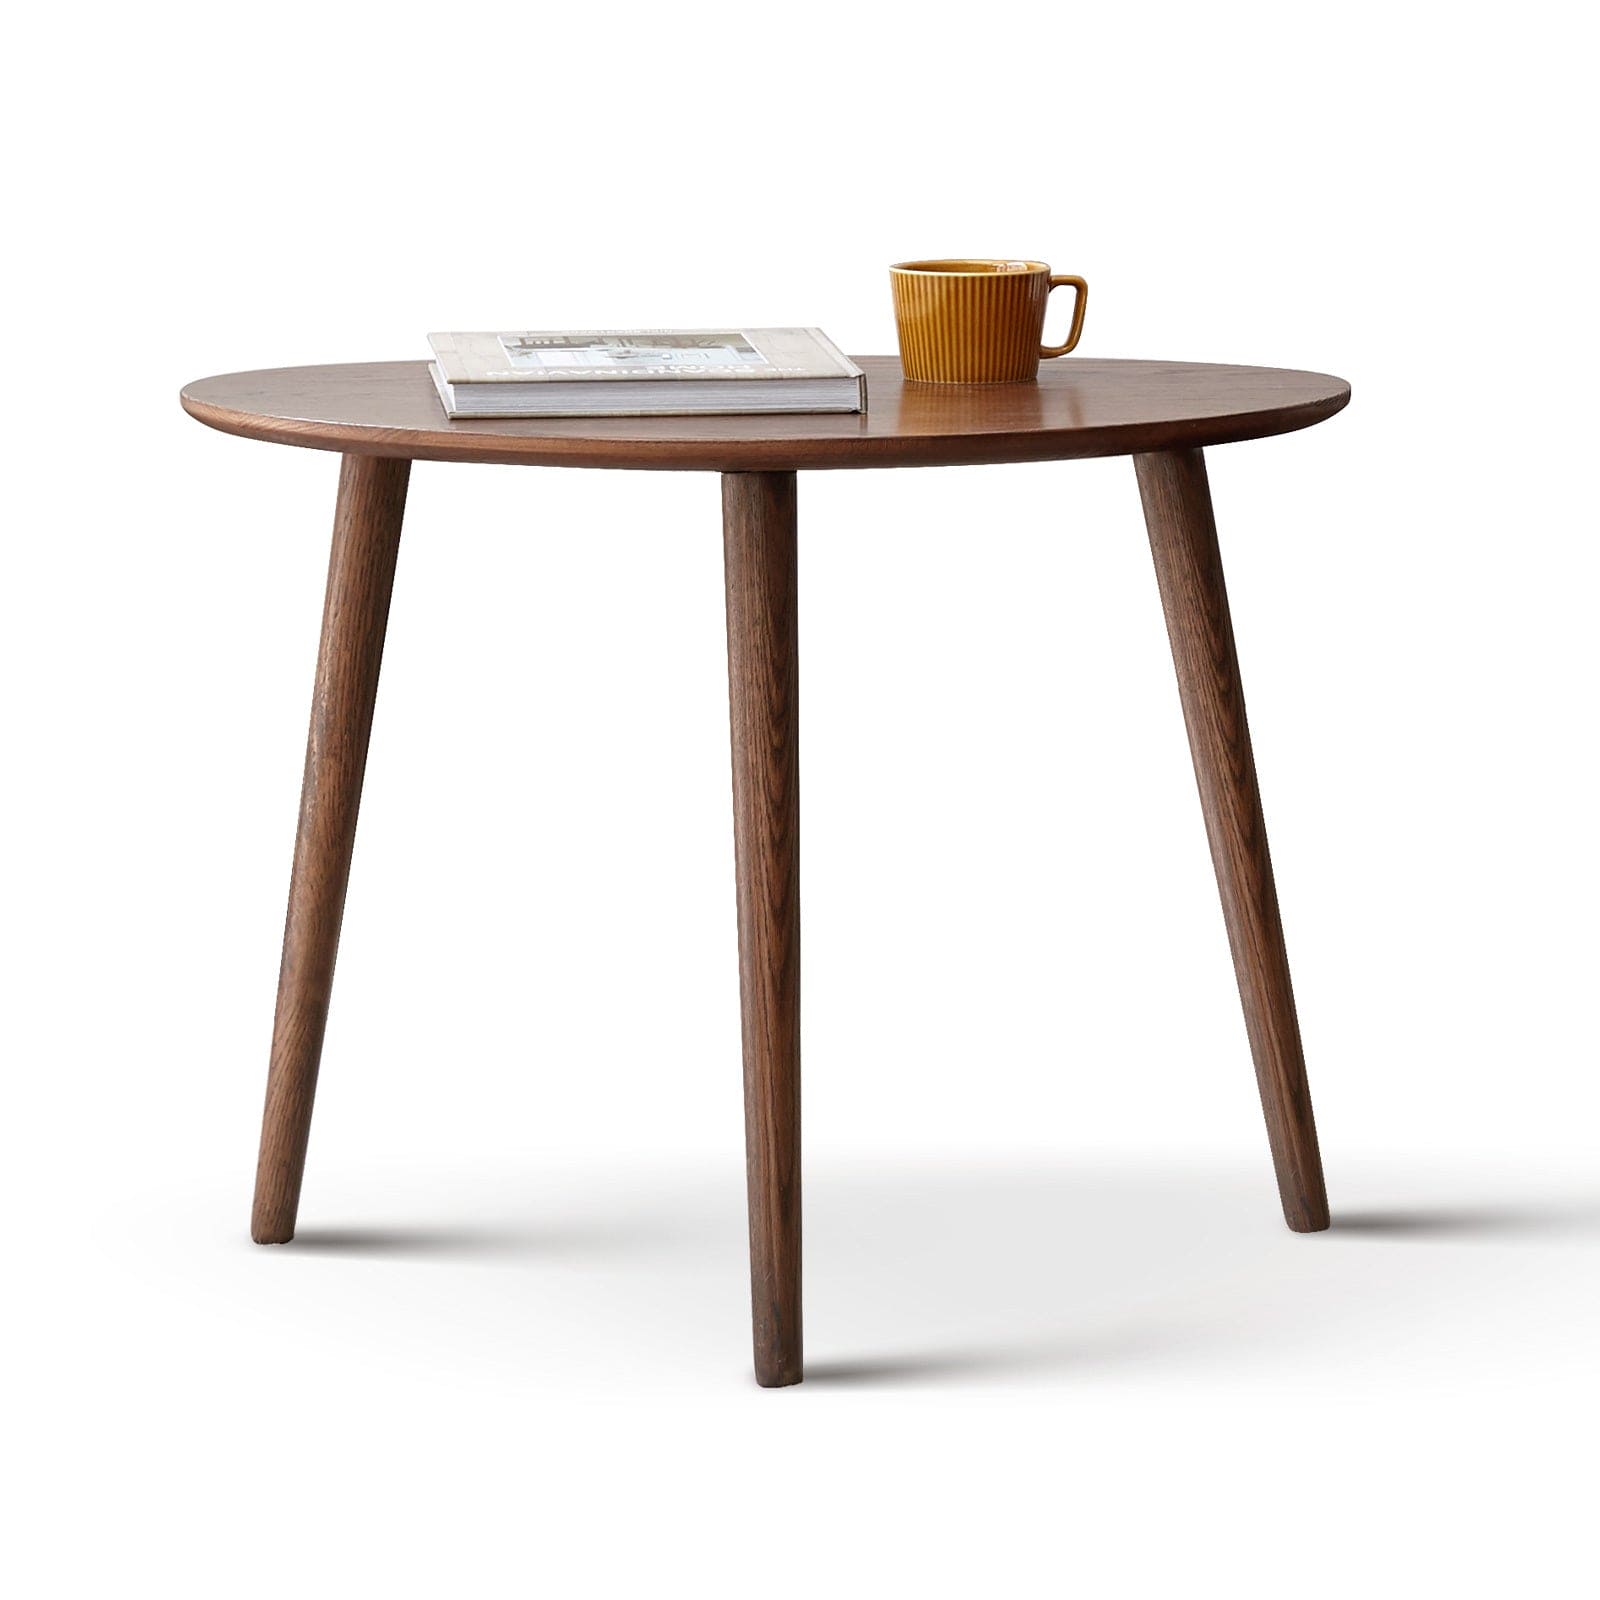 (SINGLE) Center Table Low Table 100% Solid Oak Wood Top Plate Desk Pebble Shaped Natural Wooden Coffee Table Width 58 x Depth 40 x Height 85 cm Desk Work from Home Easy to Assemble